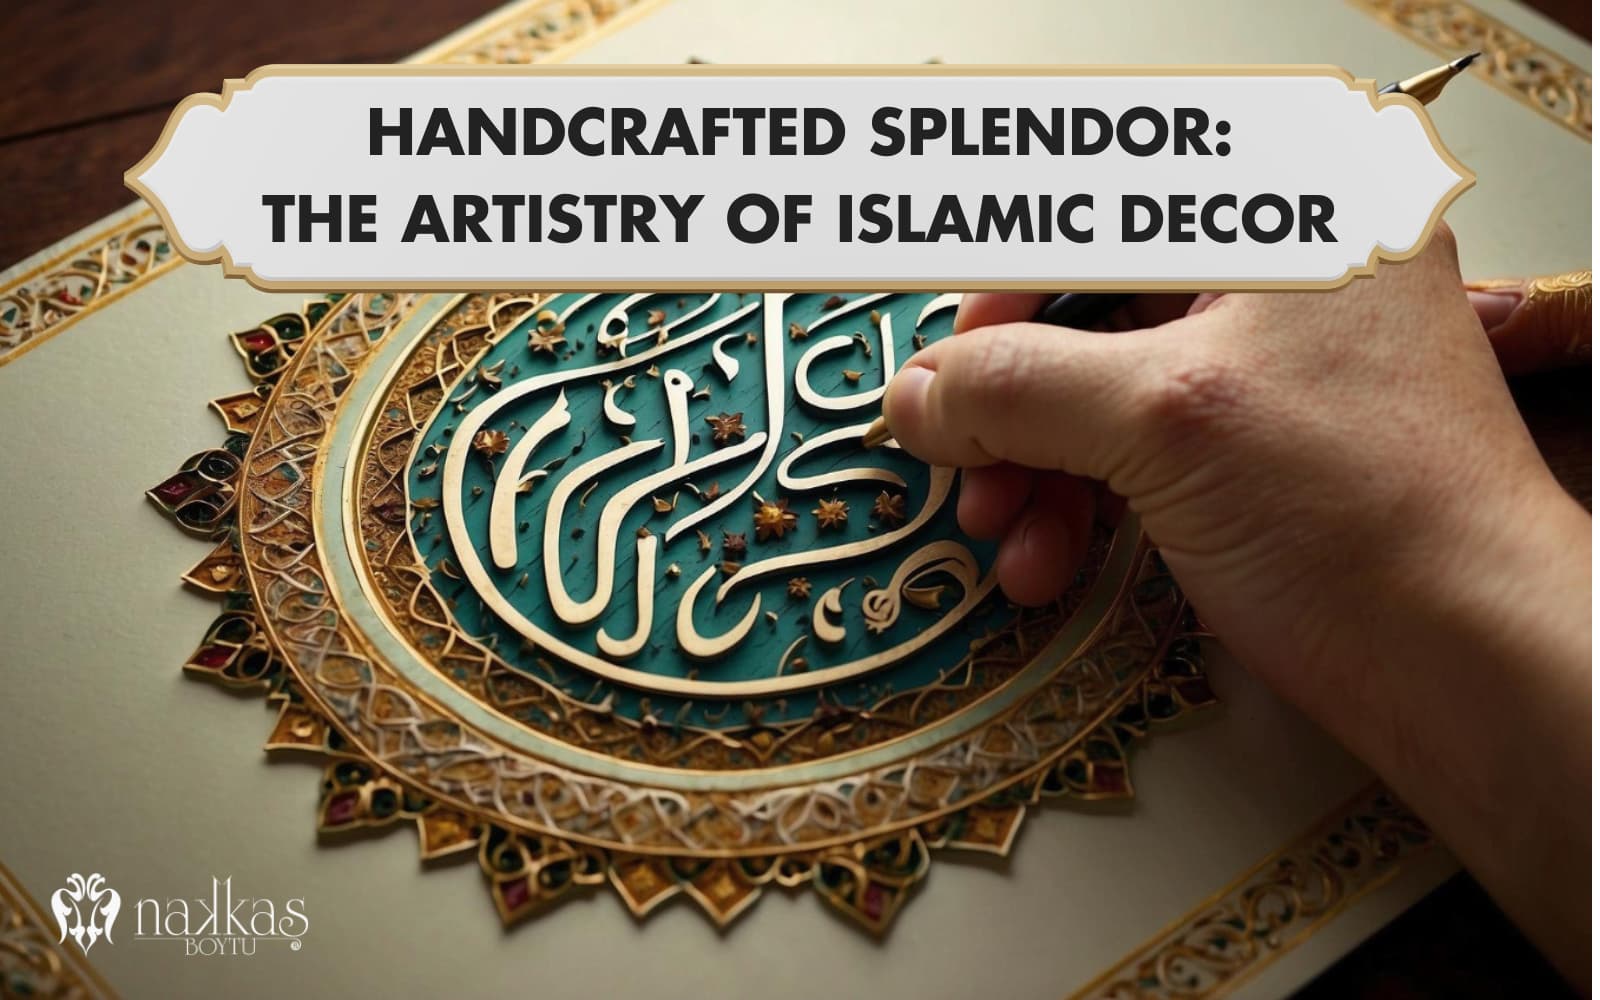 islamic handcrafted decor artistry